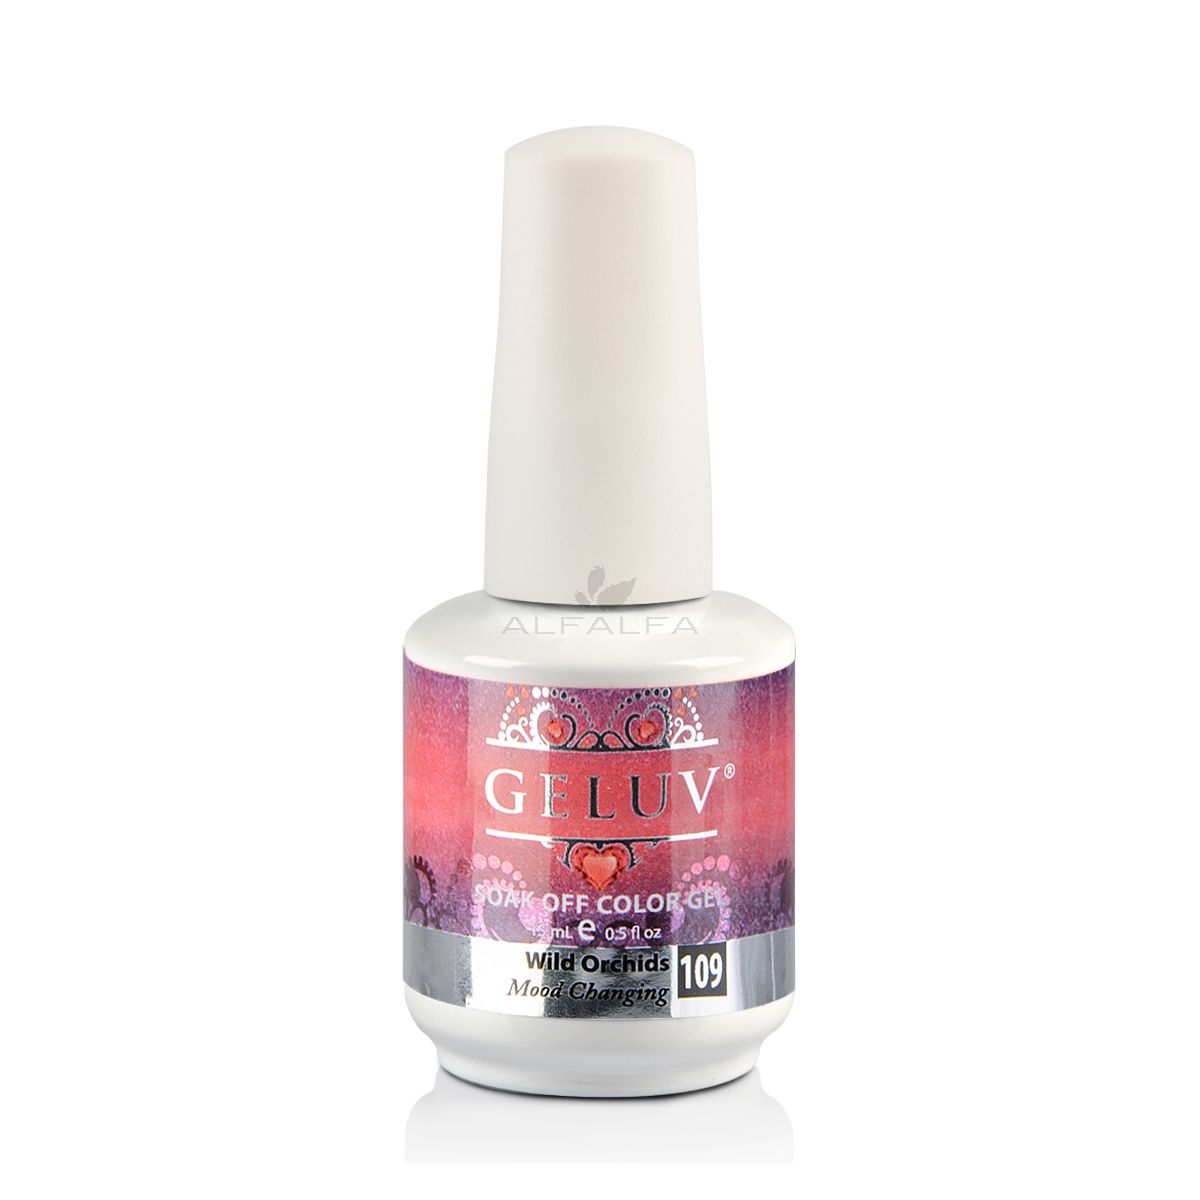 Geluv #109 Wild Orchid - Mood Changing 0.5 oz